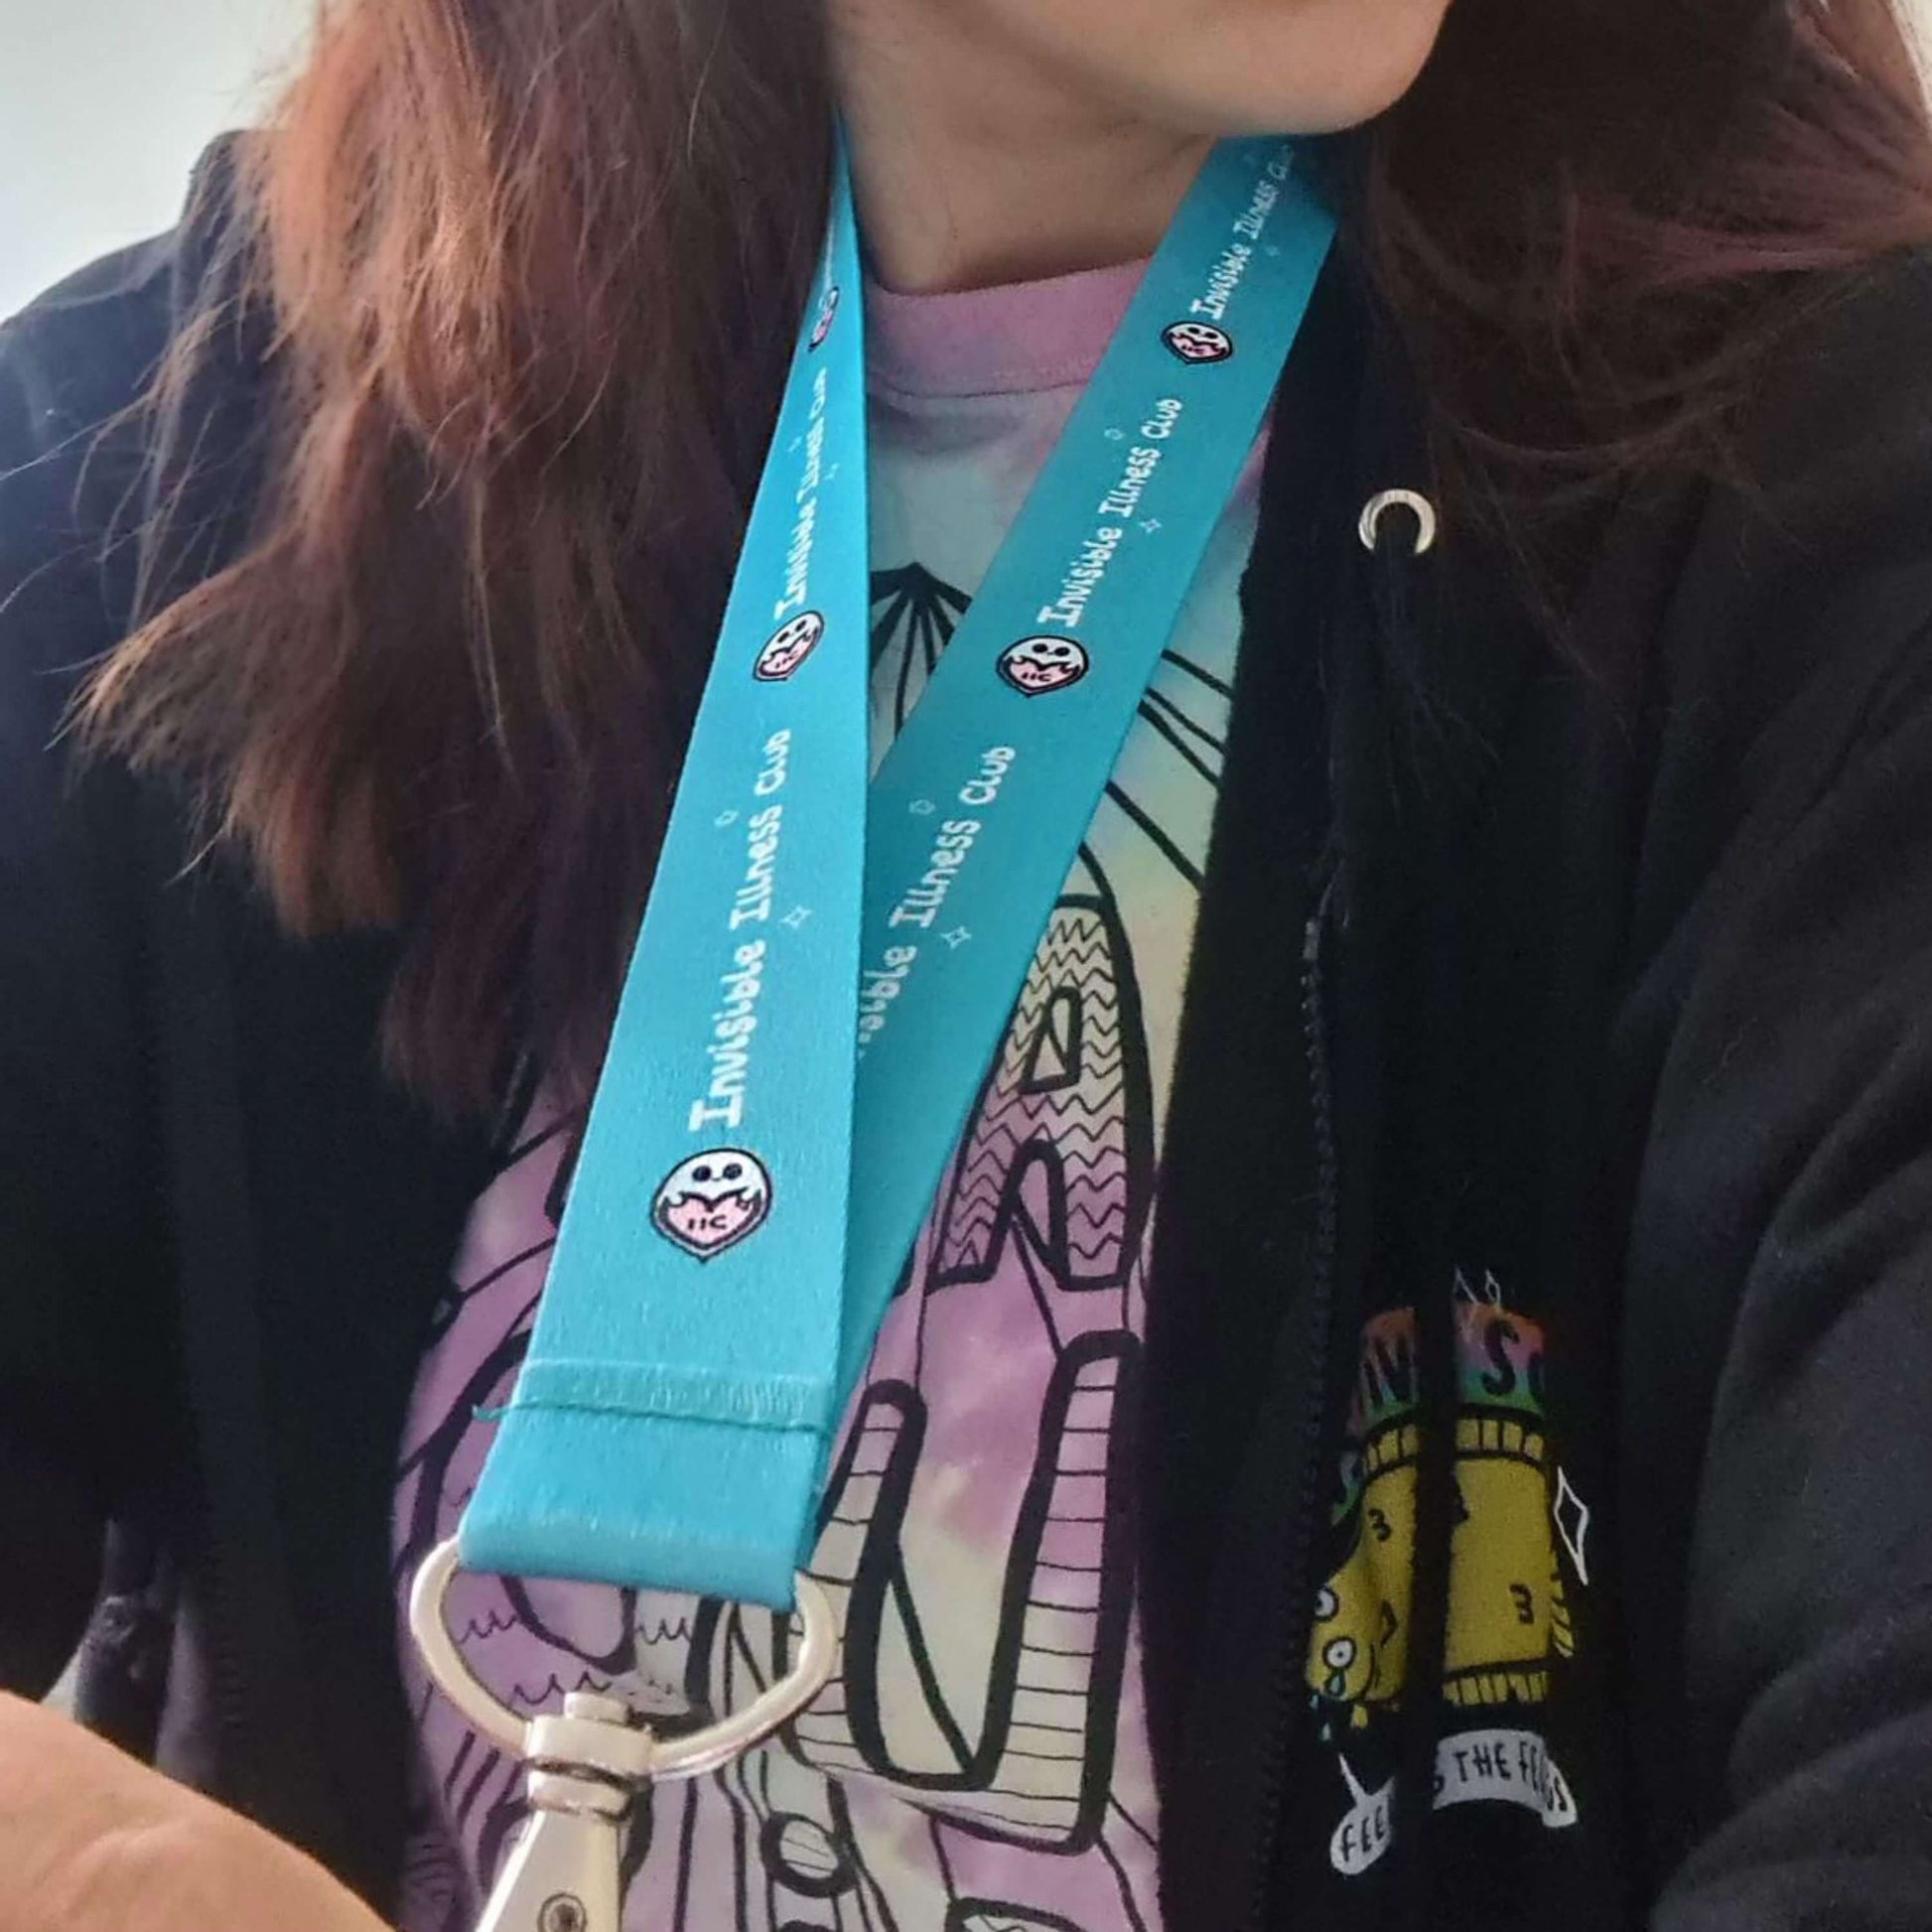 The Invisible Illness Club Lanyard modelled by Nikky (innabox owner) wearing a katie abey rainbow tshirt and black katie abey hoodie. The pastel blue lanyard has repeating white text reading 'invisible illness club' and innabox pastel ghost logo. It has a silver lobster clip and white safety break. The hand drawn design is raising awareness for hidden disabilities.